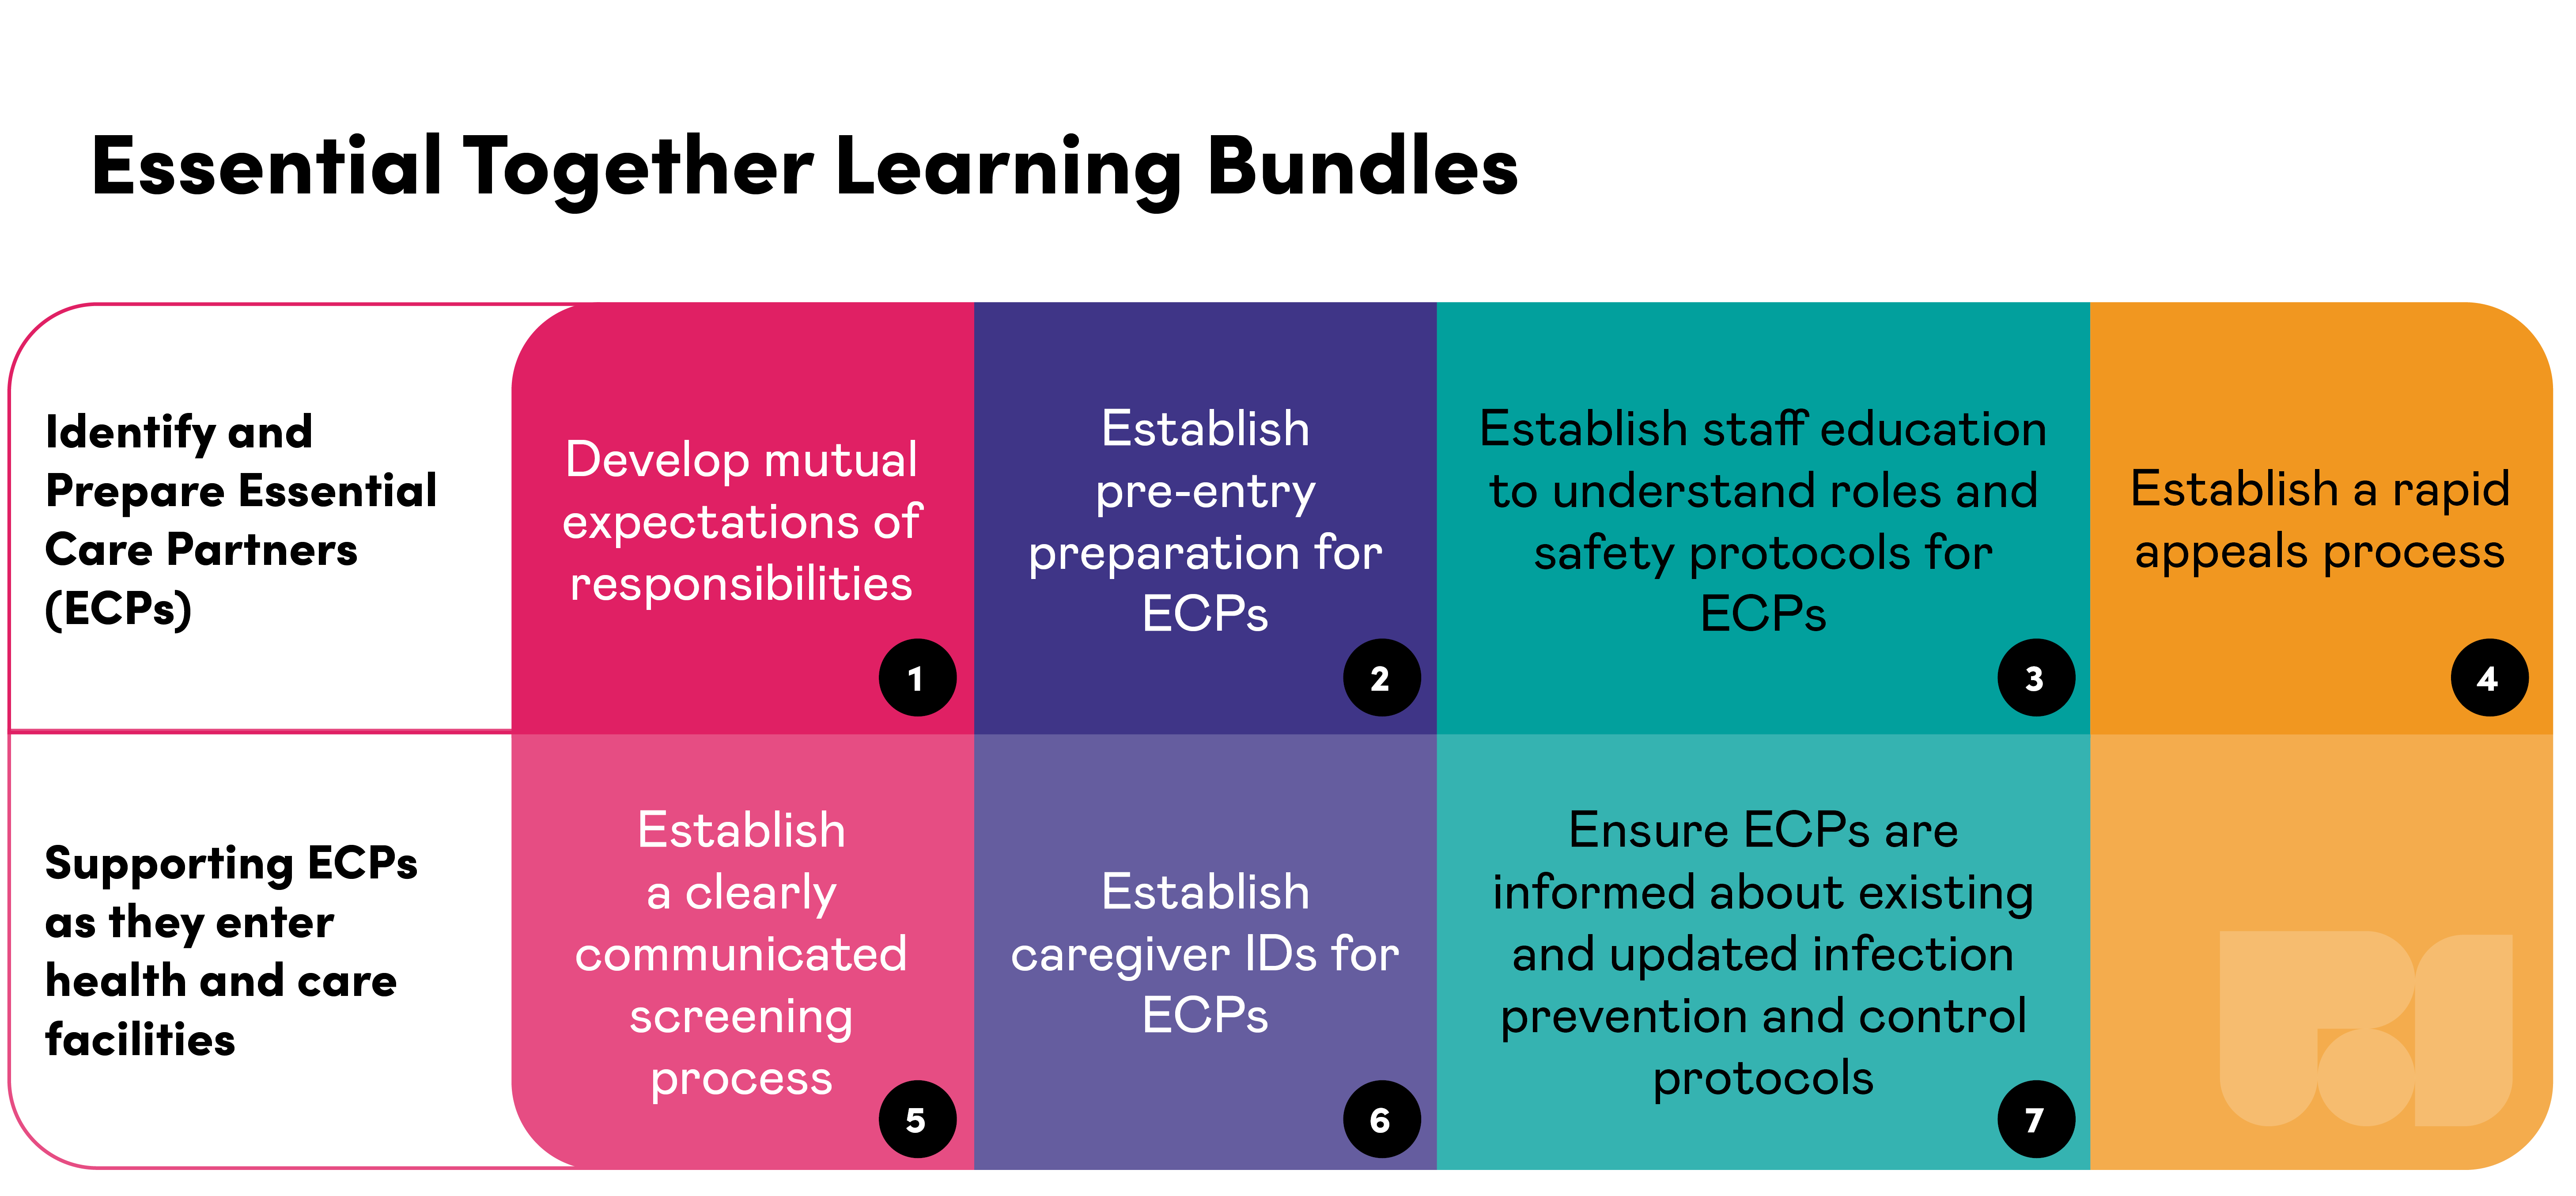 A graphic describing the steps of the Essential Together Learning Bundles.  Section 1 Identifying and Preparing Essential Care Partners (ECPs); 1 Develop mutual expectations of responsibilities; 2 Establish pre-entry preparation for ECPs; 3 Establish staff education to understand roles and safety protocols for ECPs; 4 Establish a rapid appeals process.  Section 2: Supporting ECPs as they enter health and care facilities; 5 Establish a clearly communicated screening process; 6 Establish caregiver IDs for ECPs; 7 Ensure ECPs are informed about existing and updated infection prevention and control protocols